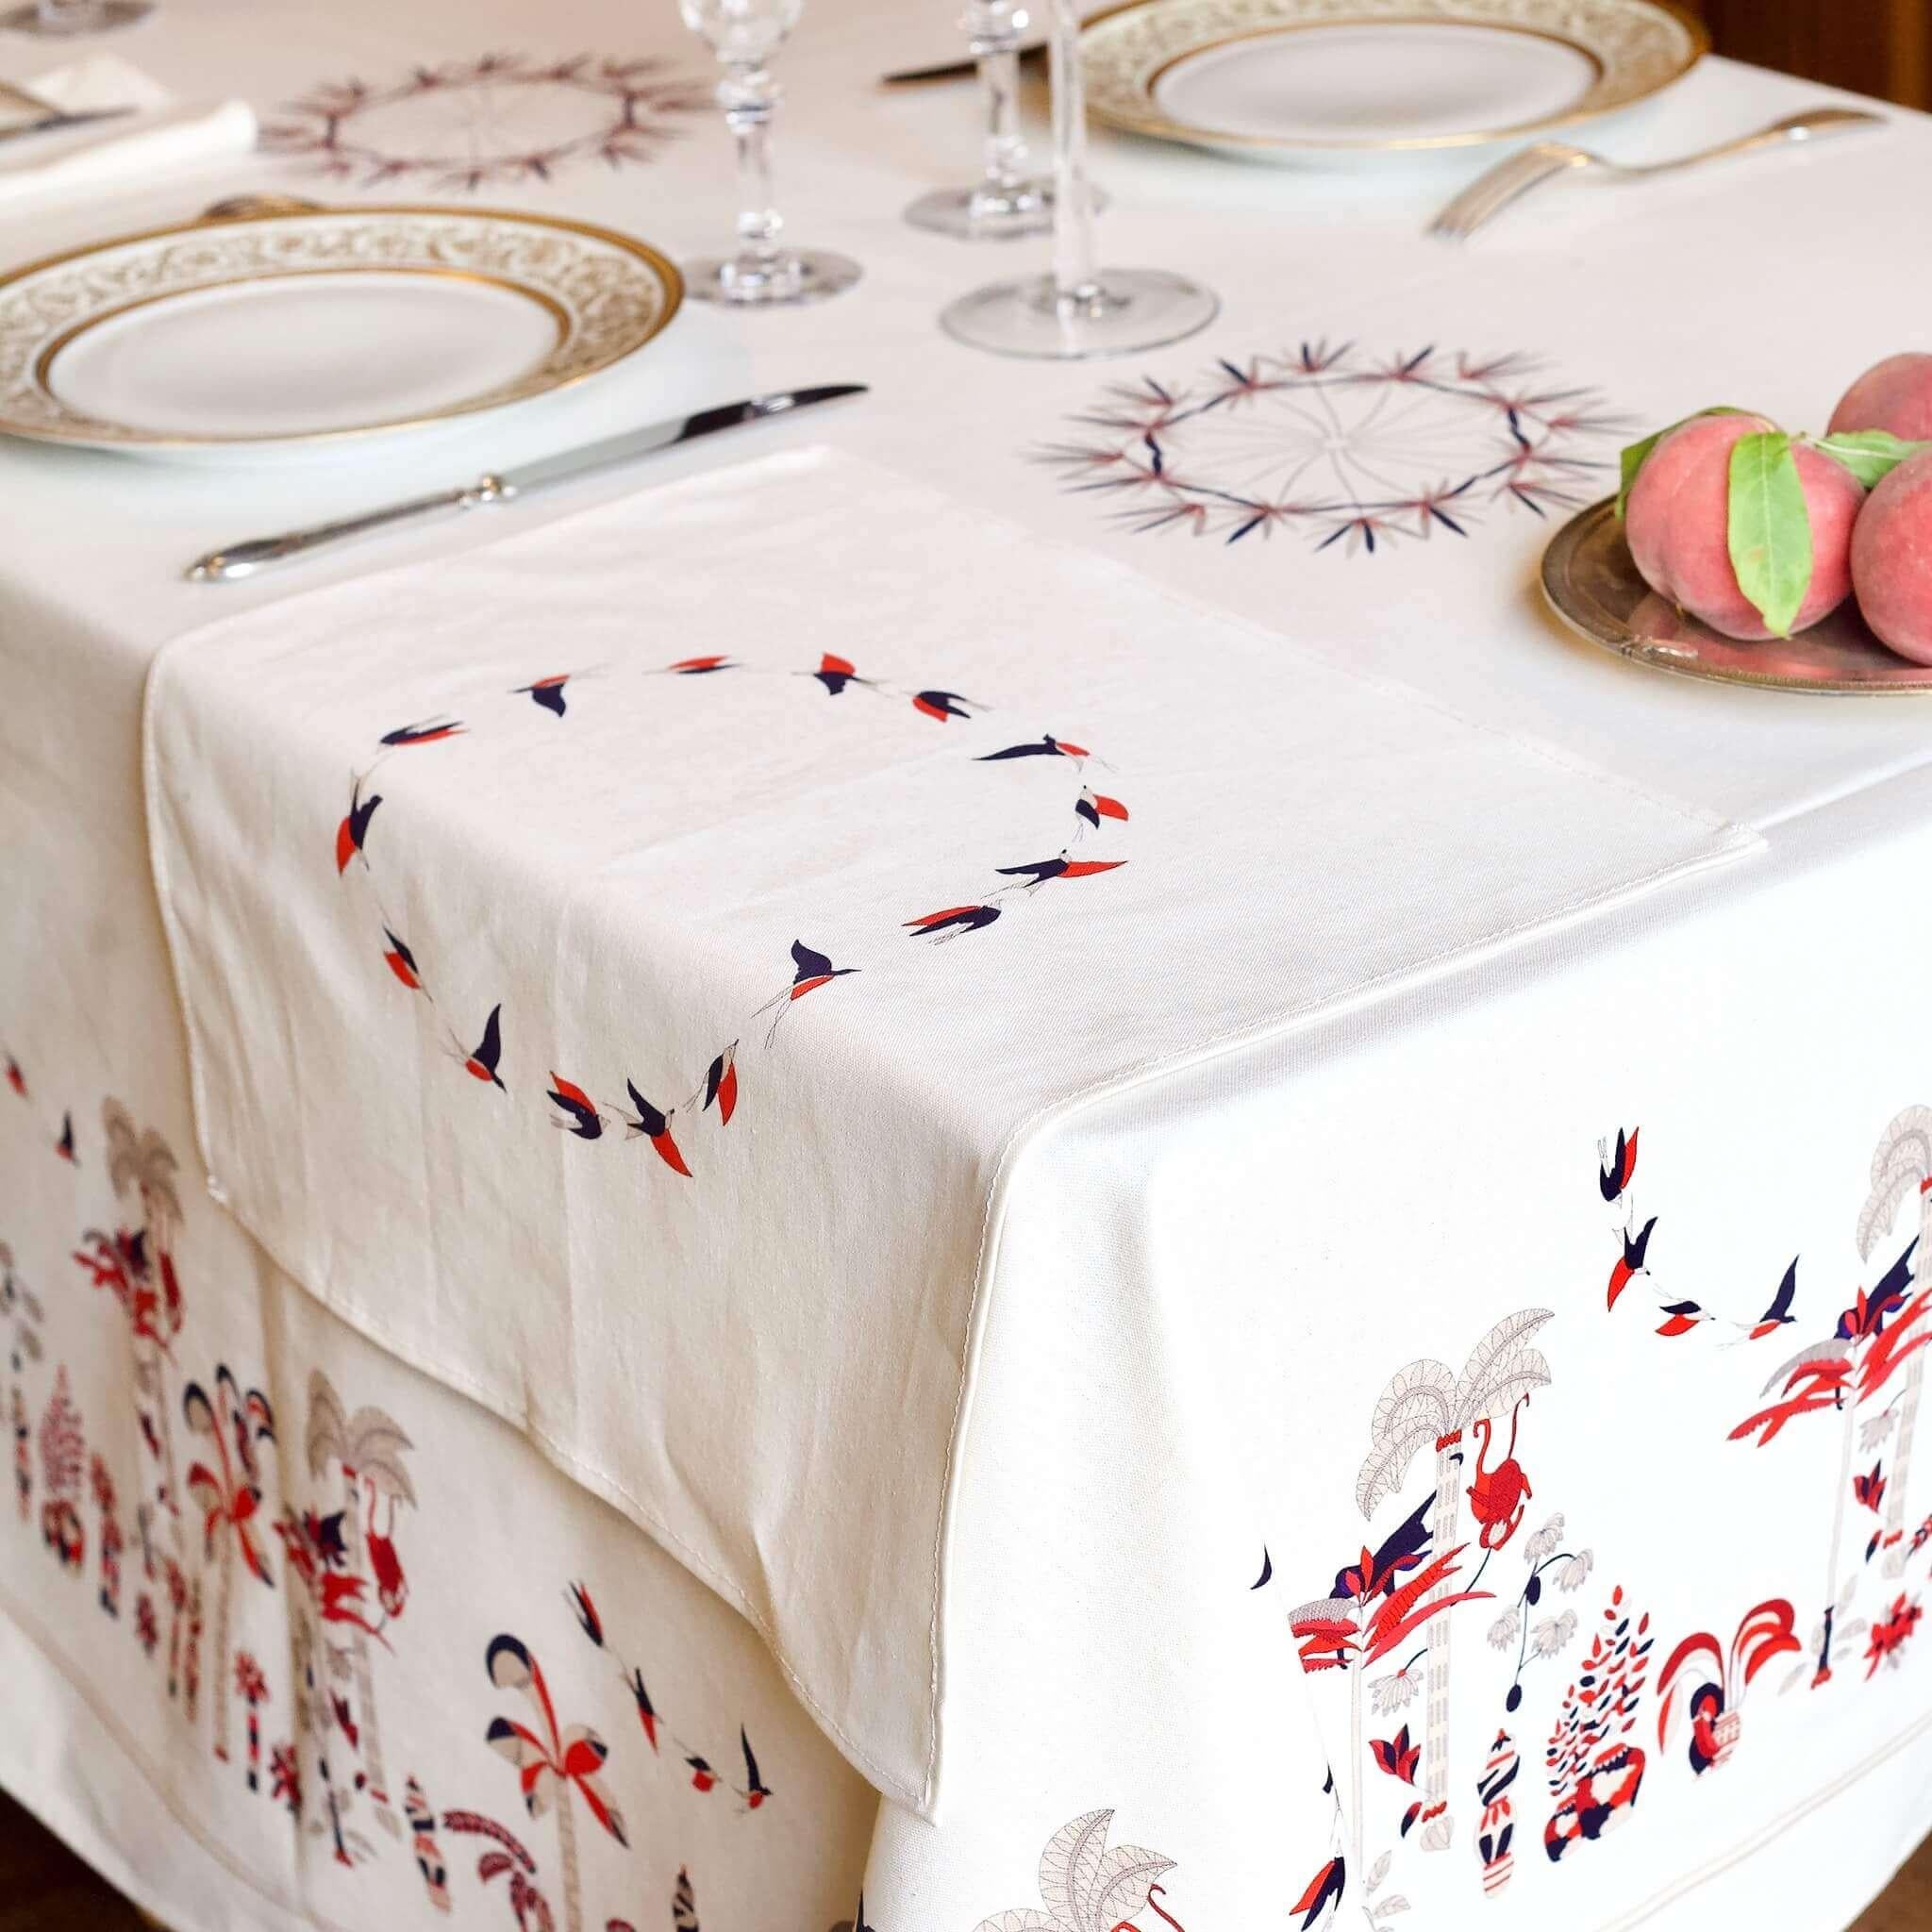 These napkins go with the Baba Red tablecloth. It comes in a set of 6 napkins. Each napkin has a unique design. If you order 2 sets, you will have 12 different napkins, with 12 unique designs.

Dimensions: 41x41cm.

Composition: 80% of cotton,